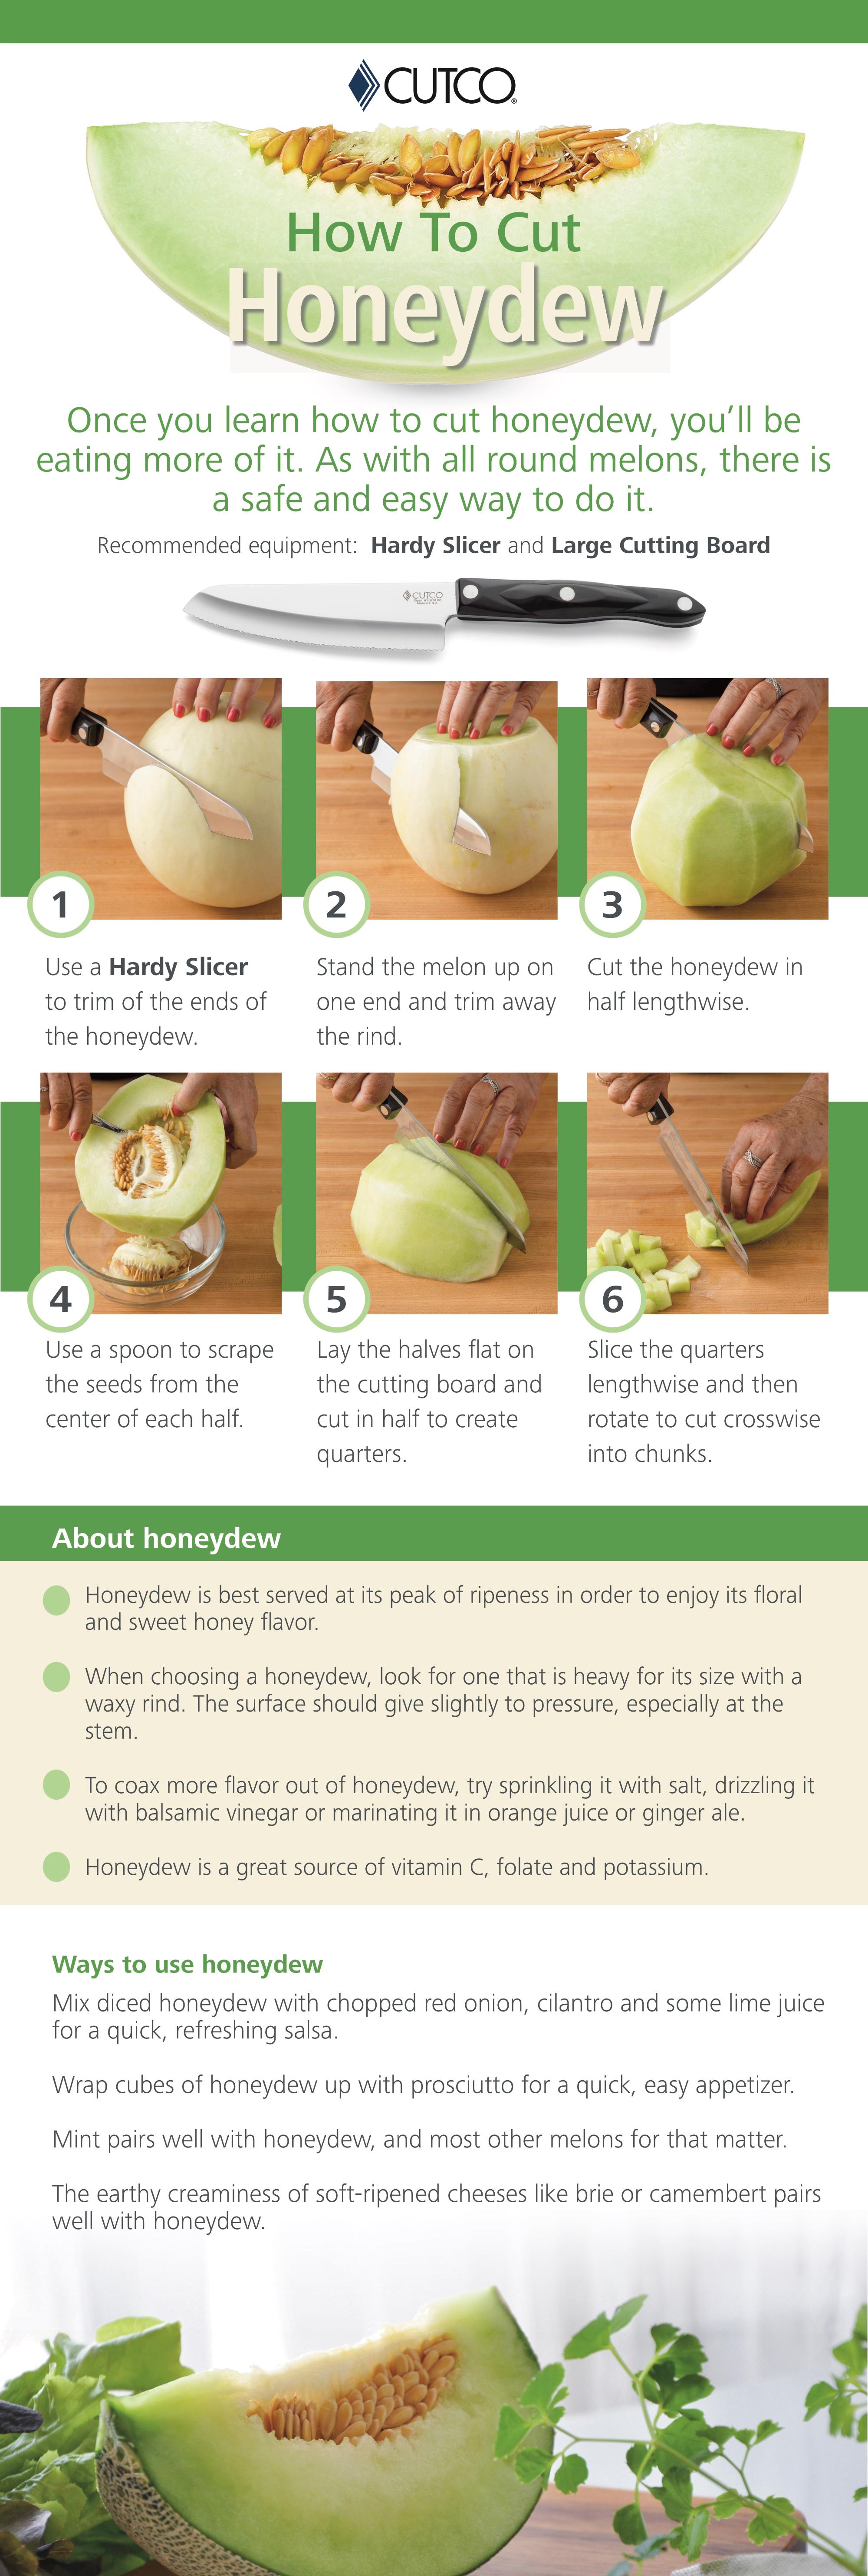 How To Cut Honeydew